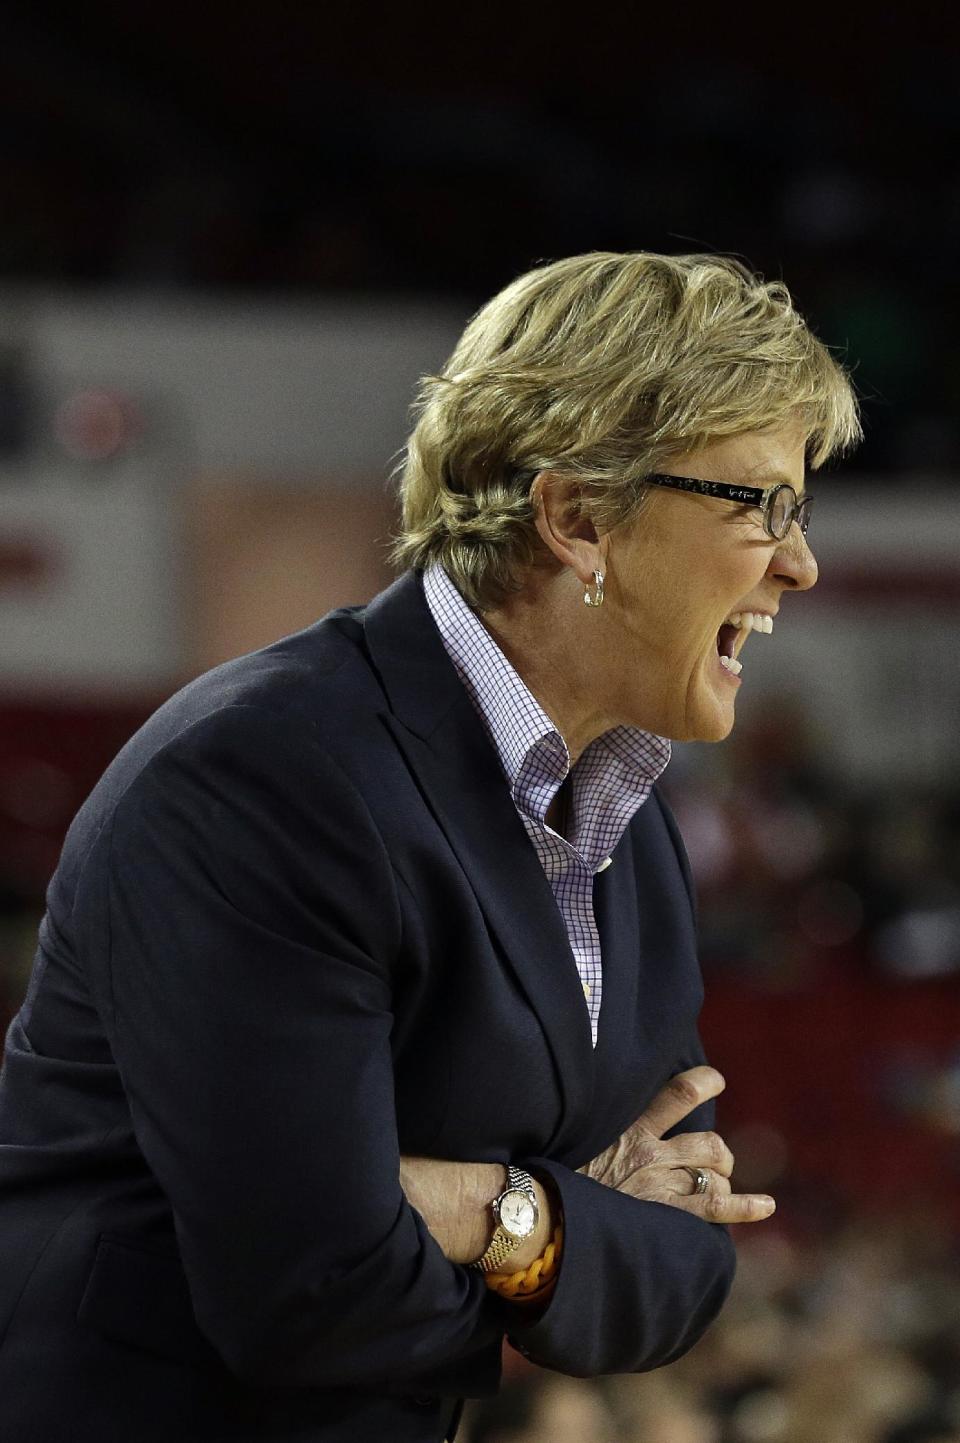 Tennessee head coach Holly Warlick directs her team from the bench in the second half of an NCAA college basketball game against Georgia, Sunday, Jan. 5, 2014, in Athens, Ga. Tennessee won 85-70. (AP Photo/John Bazemore)